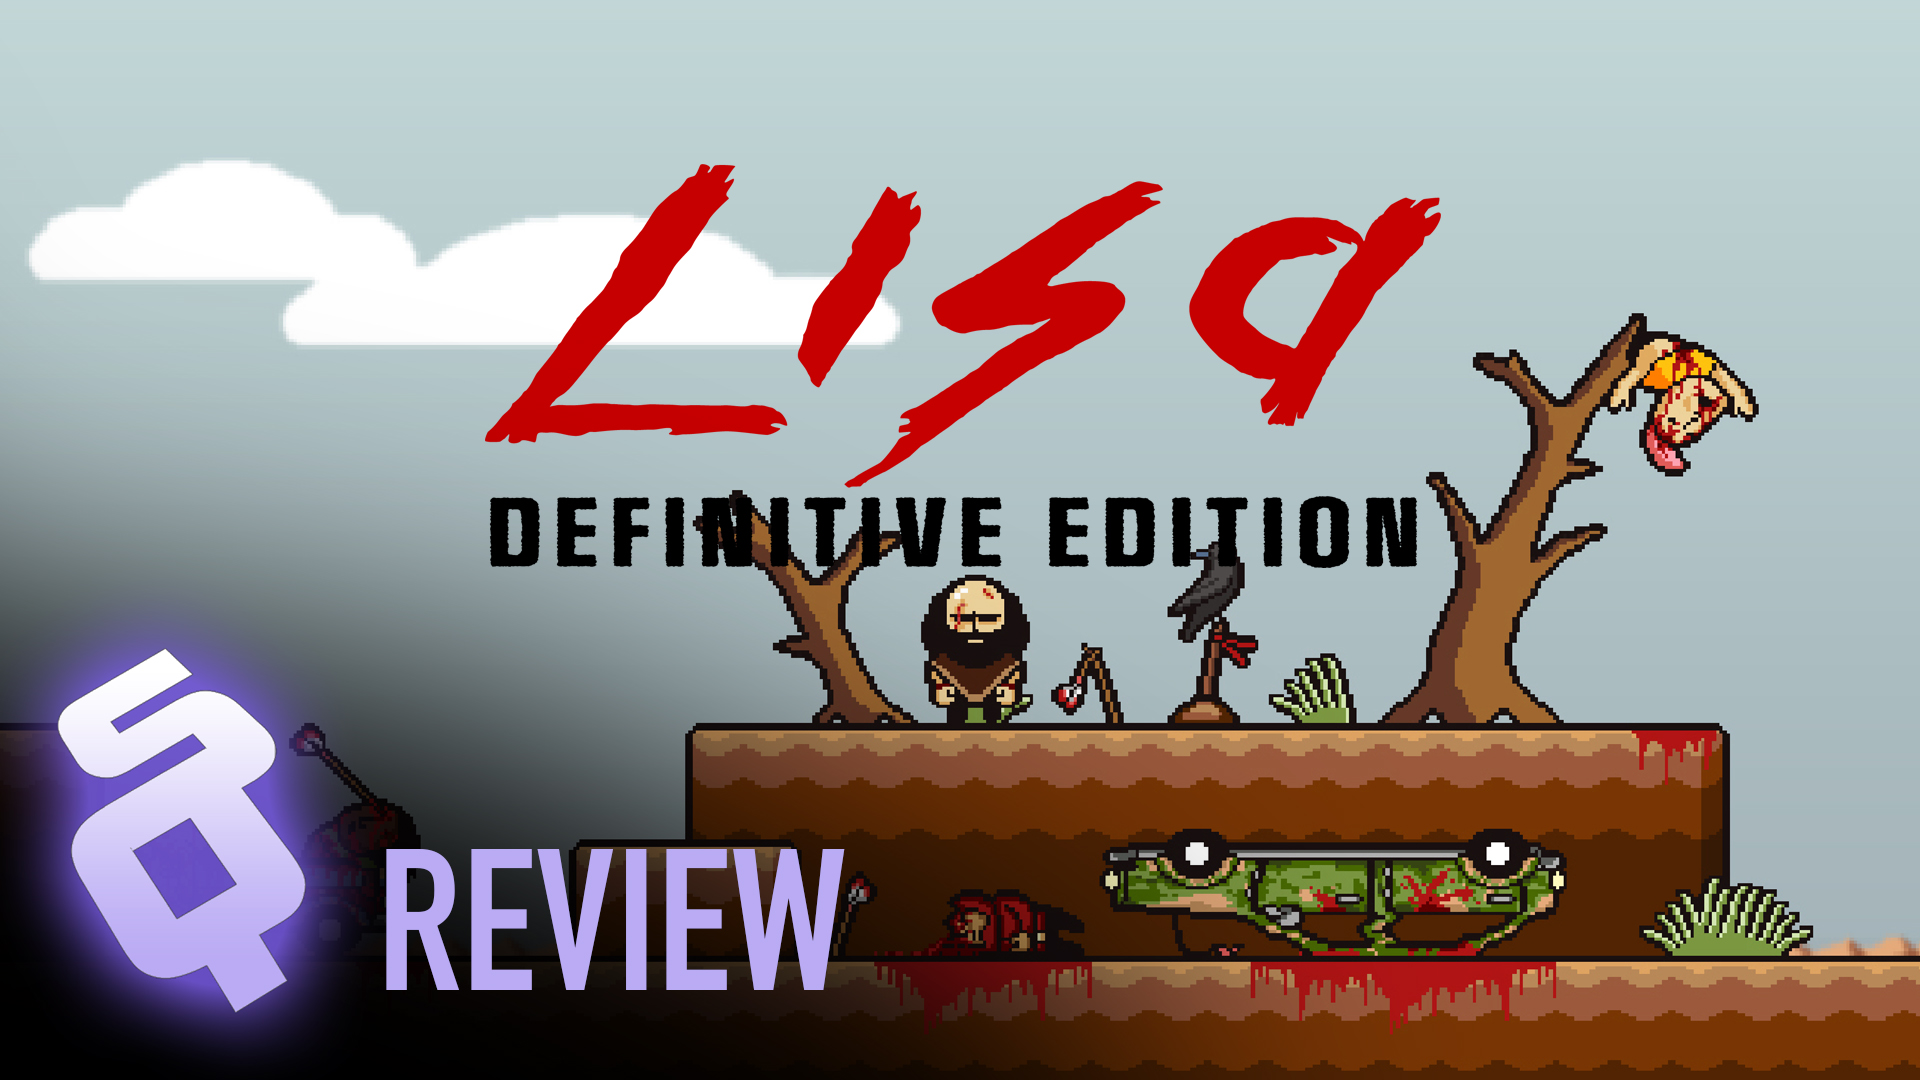 Lisa: Definitive Edition review